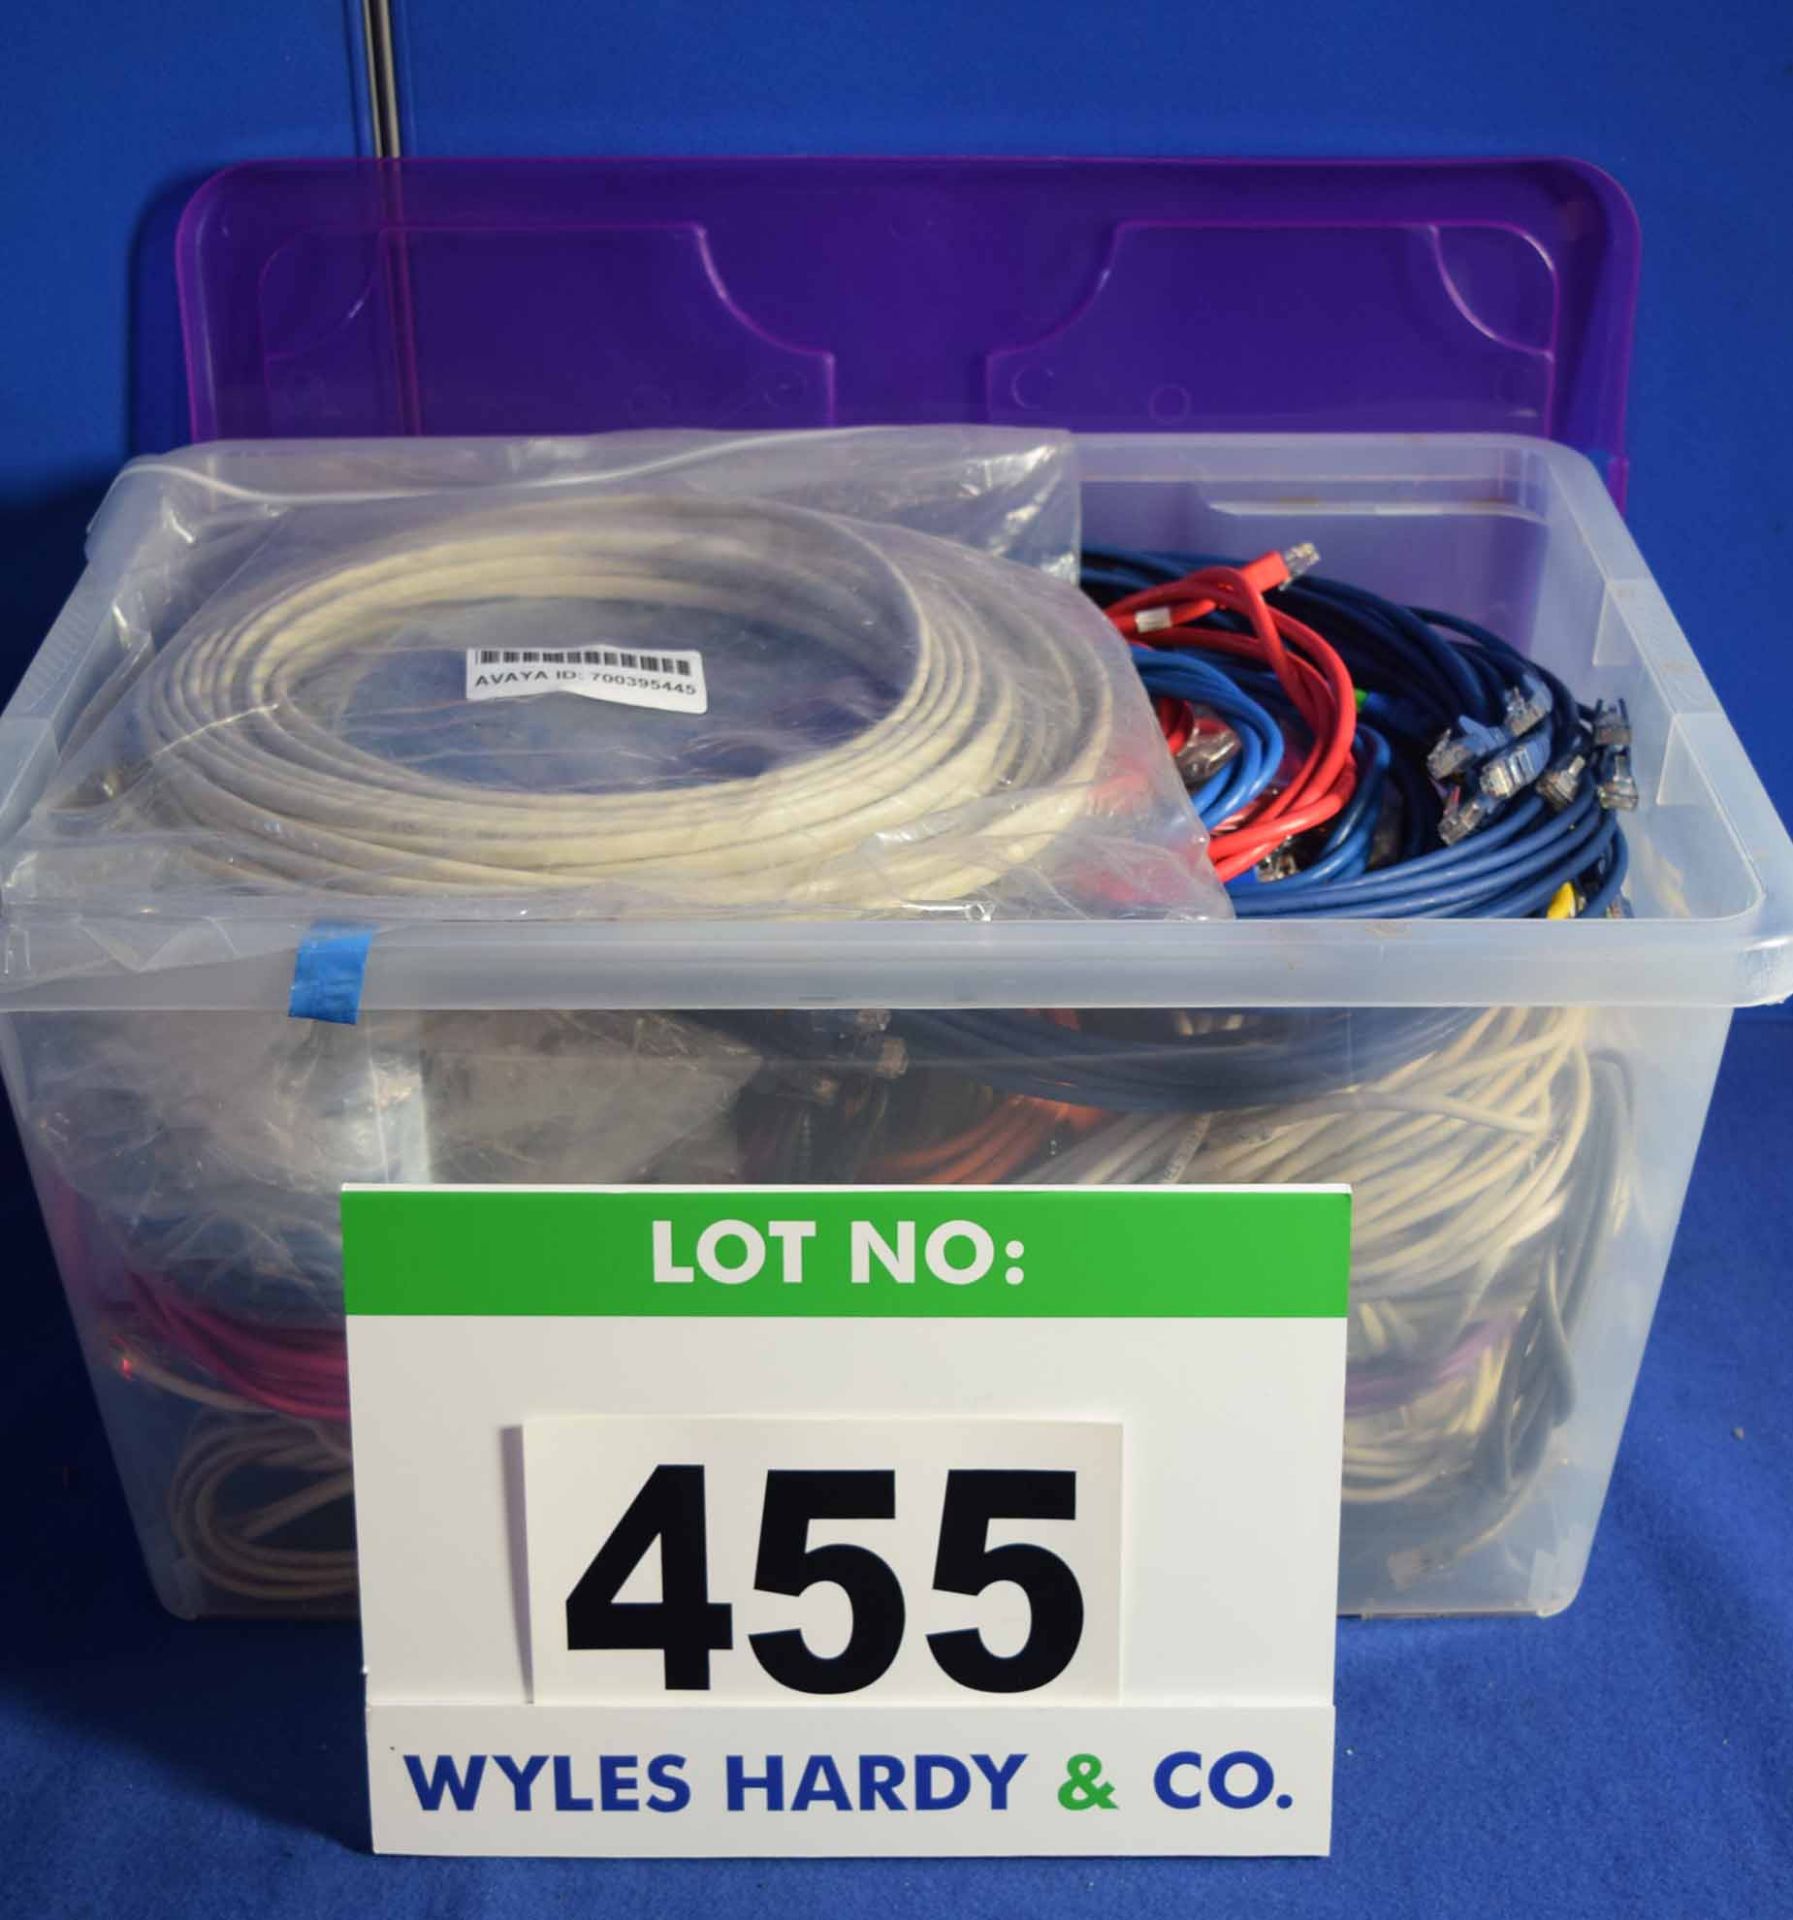 A Box of Comms Cables